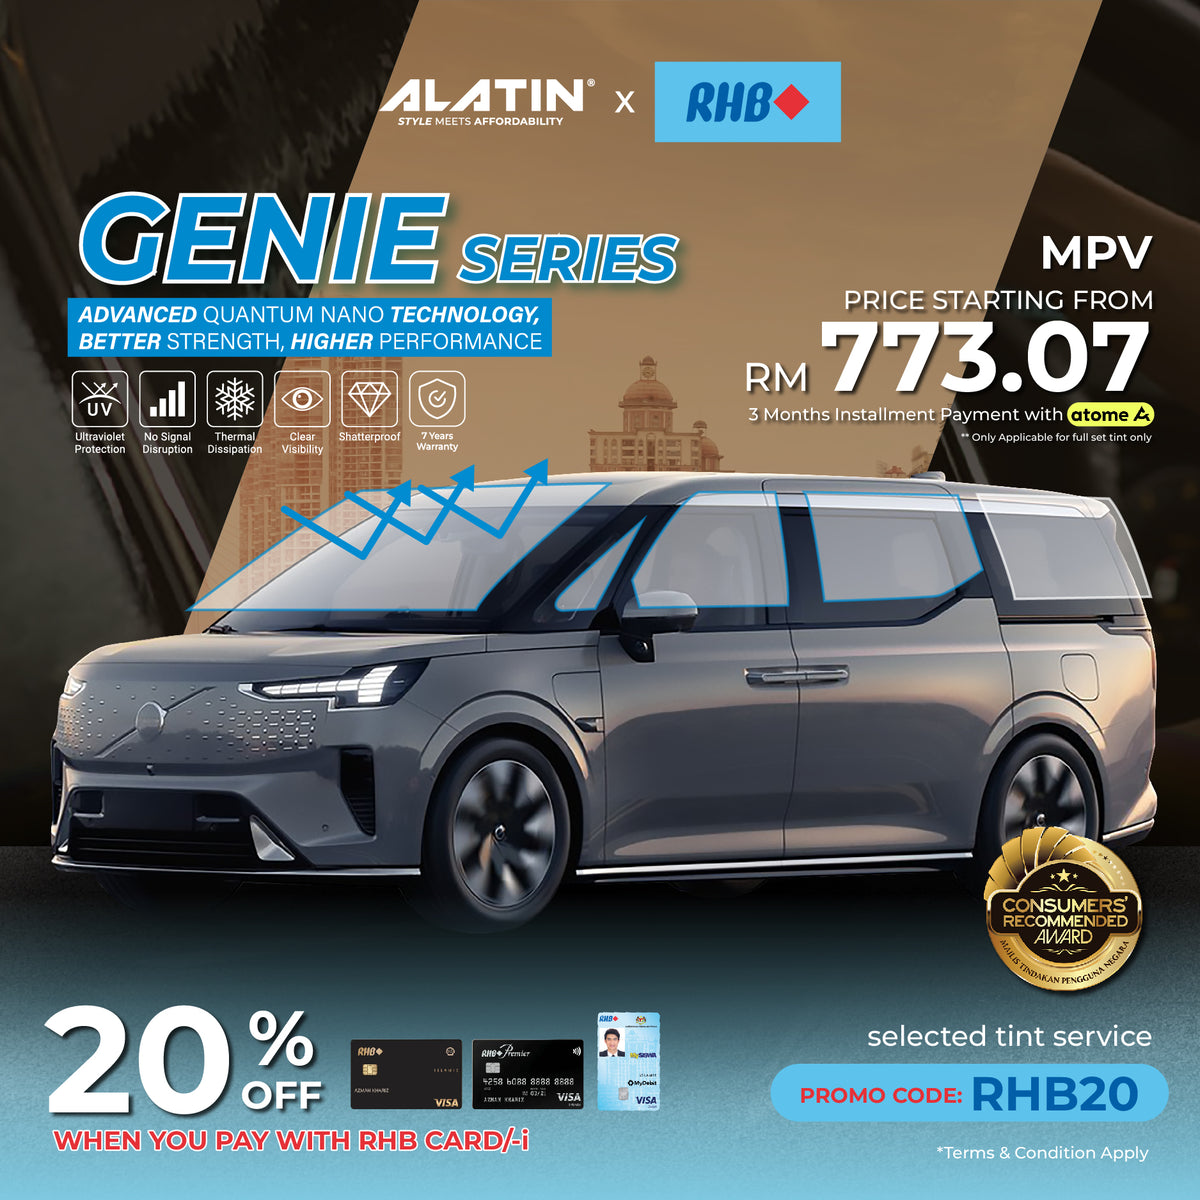 Genie Series for MPV ( 7 Seater )